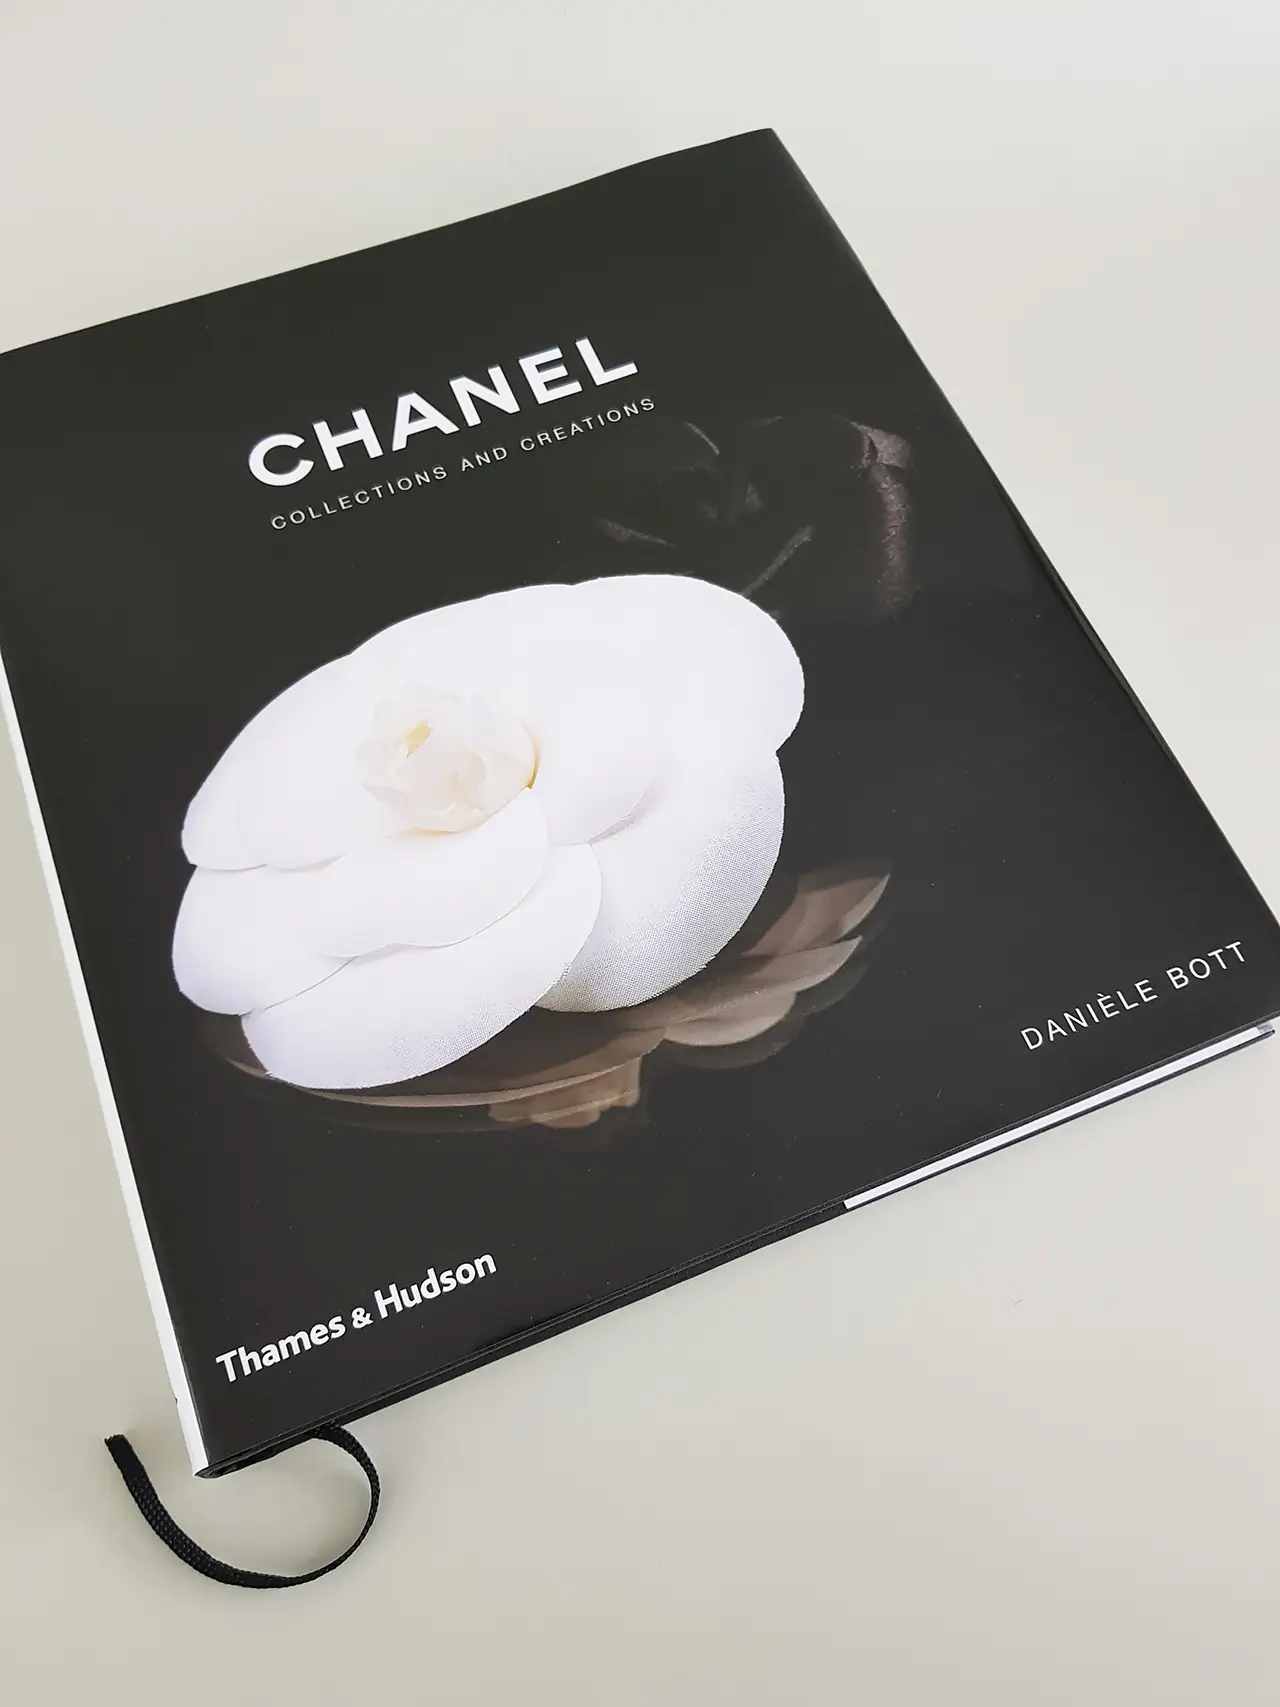 Chanel Collections and Creations Book by Thames & Hudson - Dimensiva